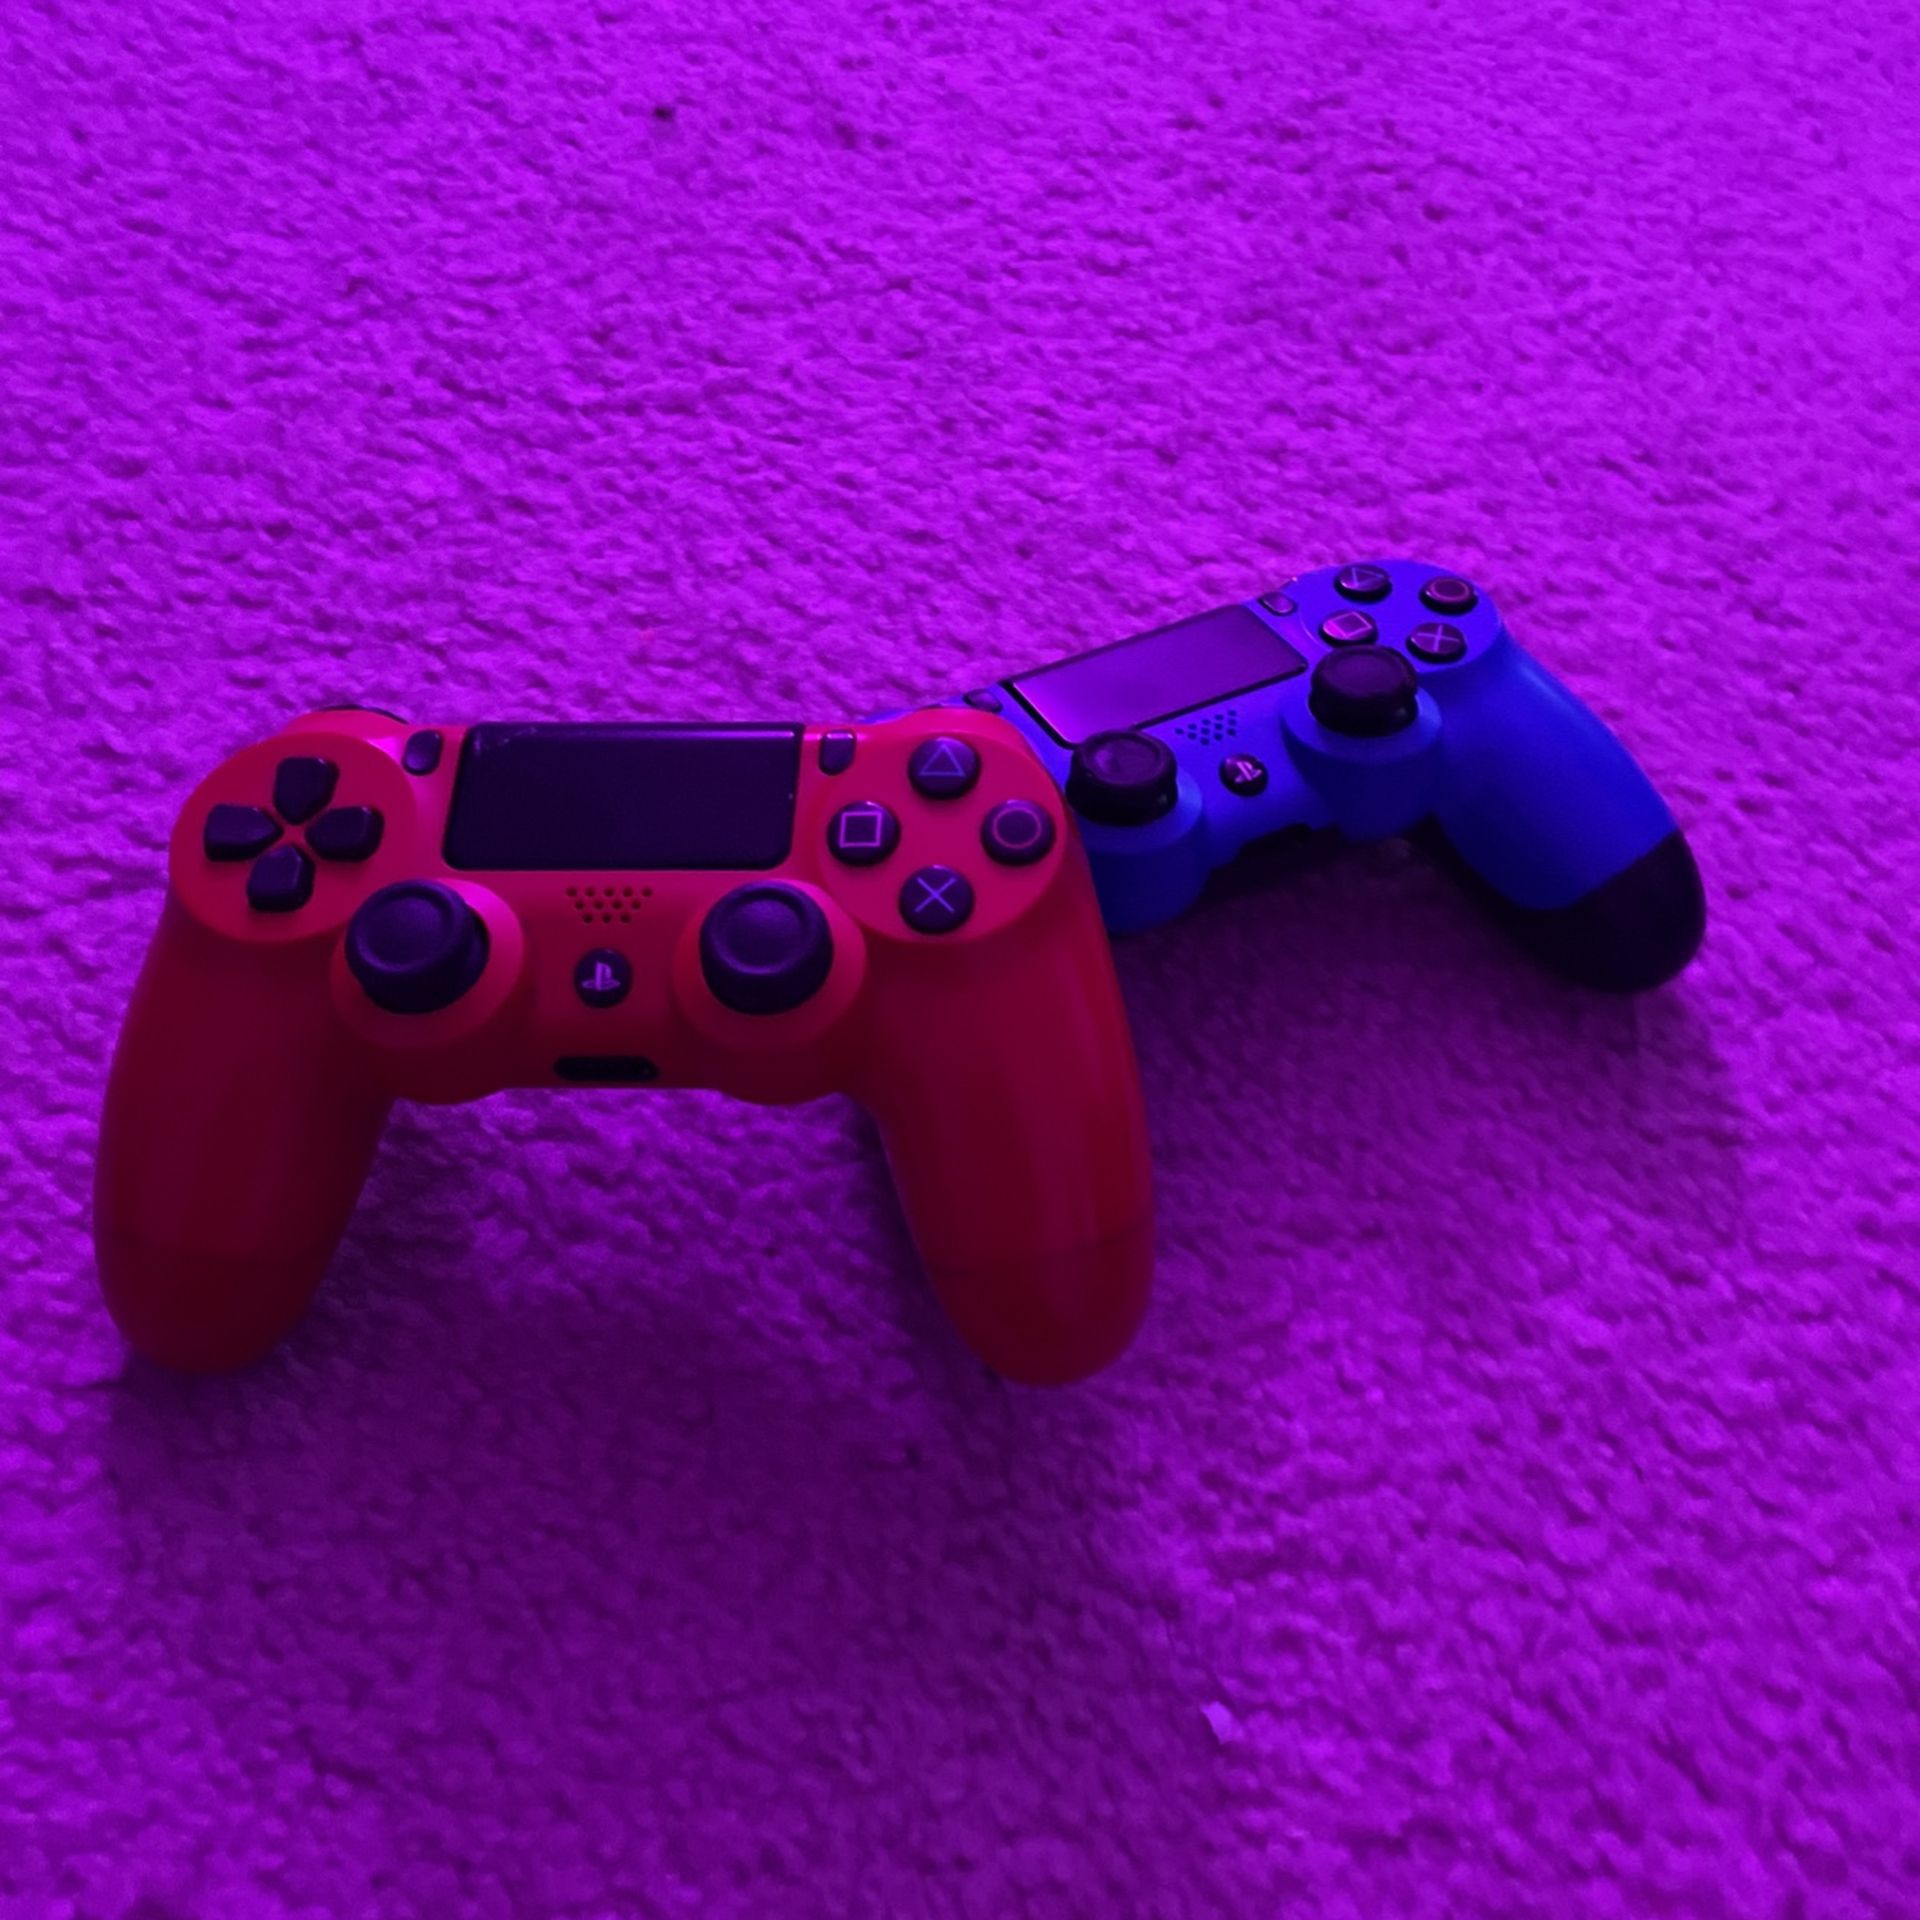 ps4 controller "Throw out offers"